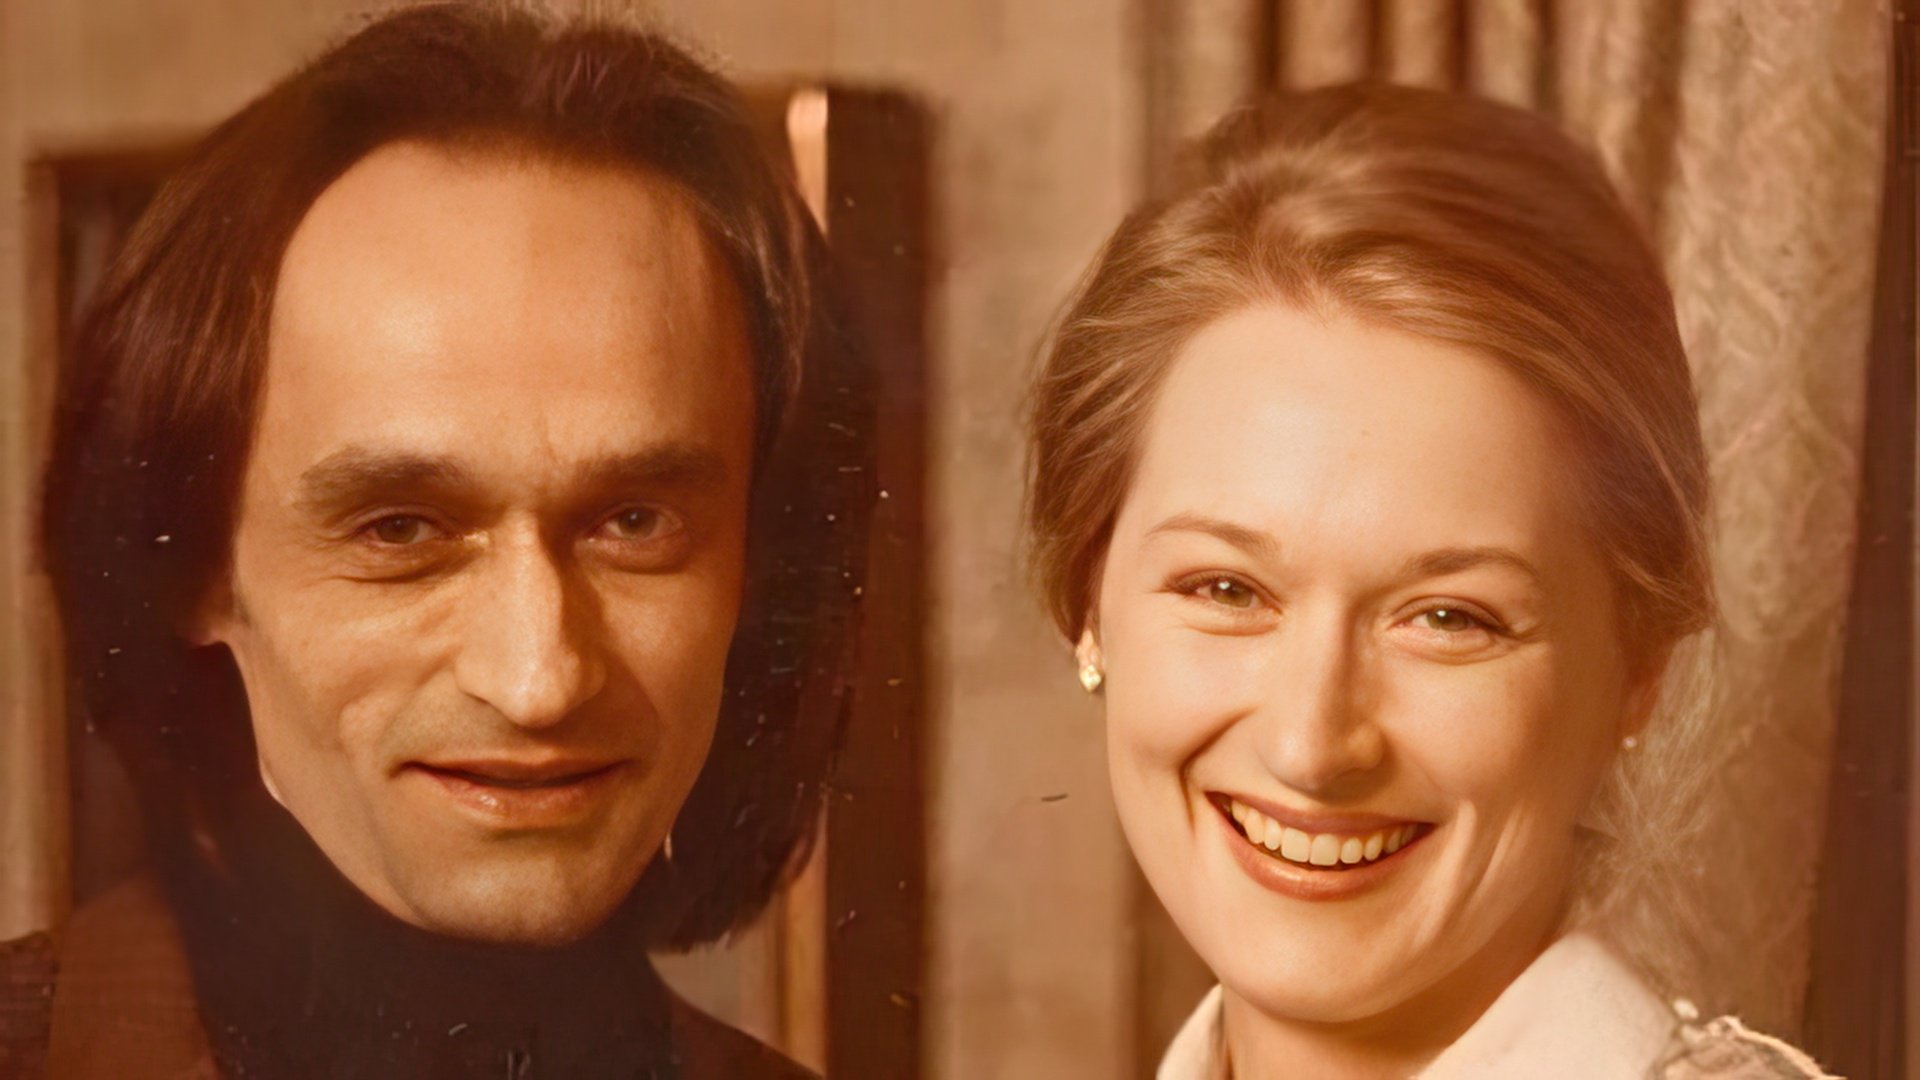 Meryl supported John as she could